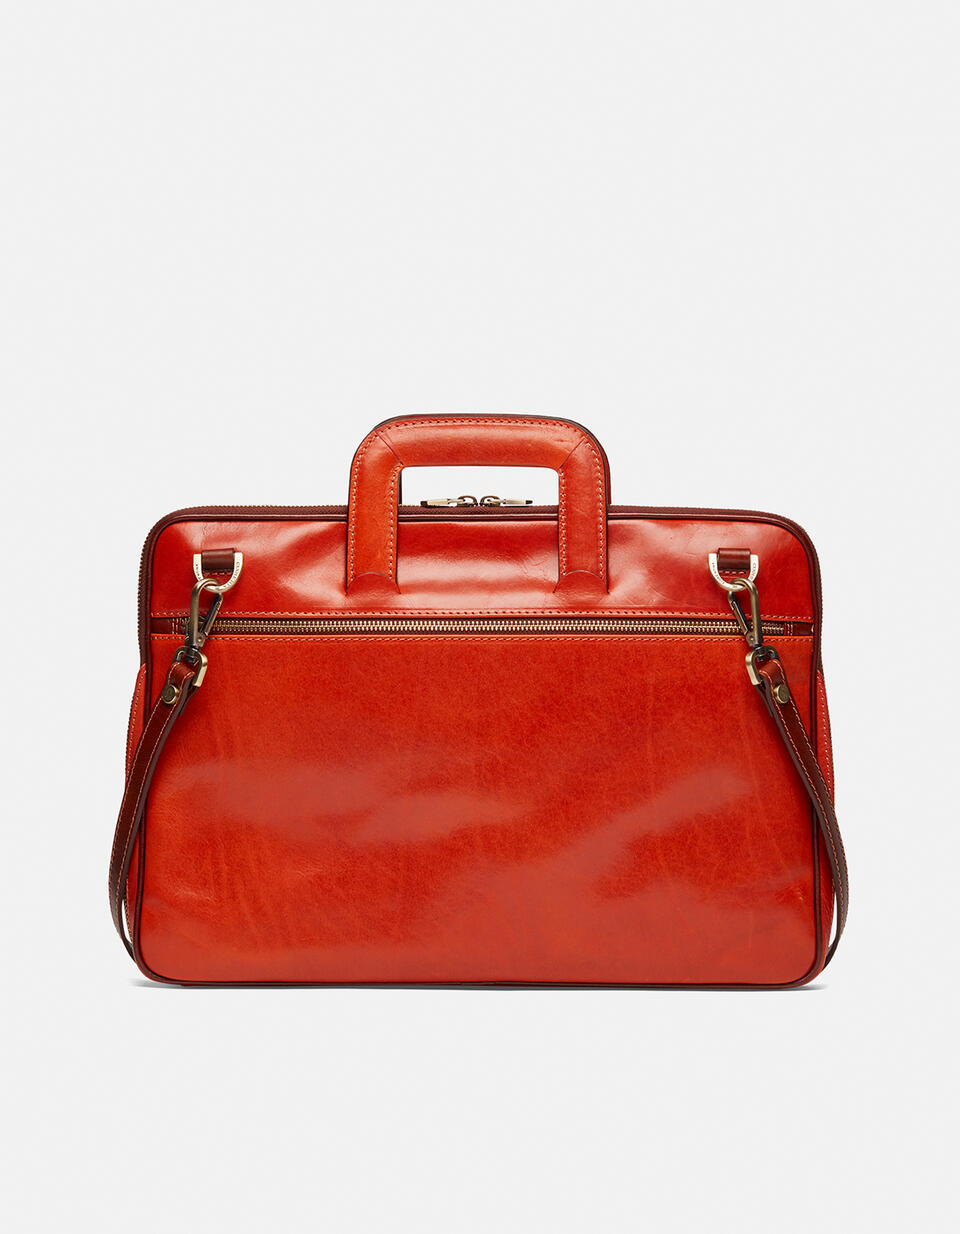 Laptop leather bag - Briefcases and Laptop Bags | Briefcases  - Briefcases and Laptop Bags | BriefcasesCuoieria Fiorentina